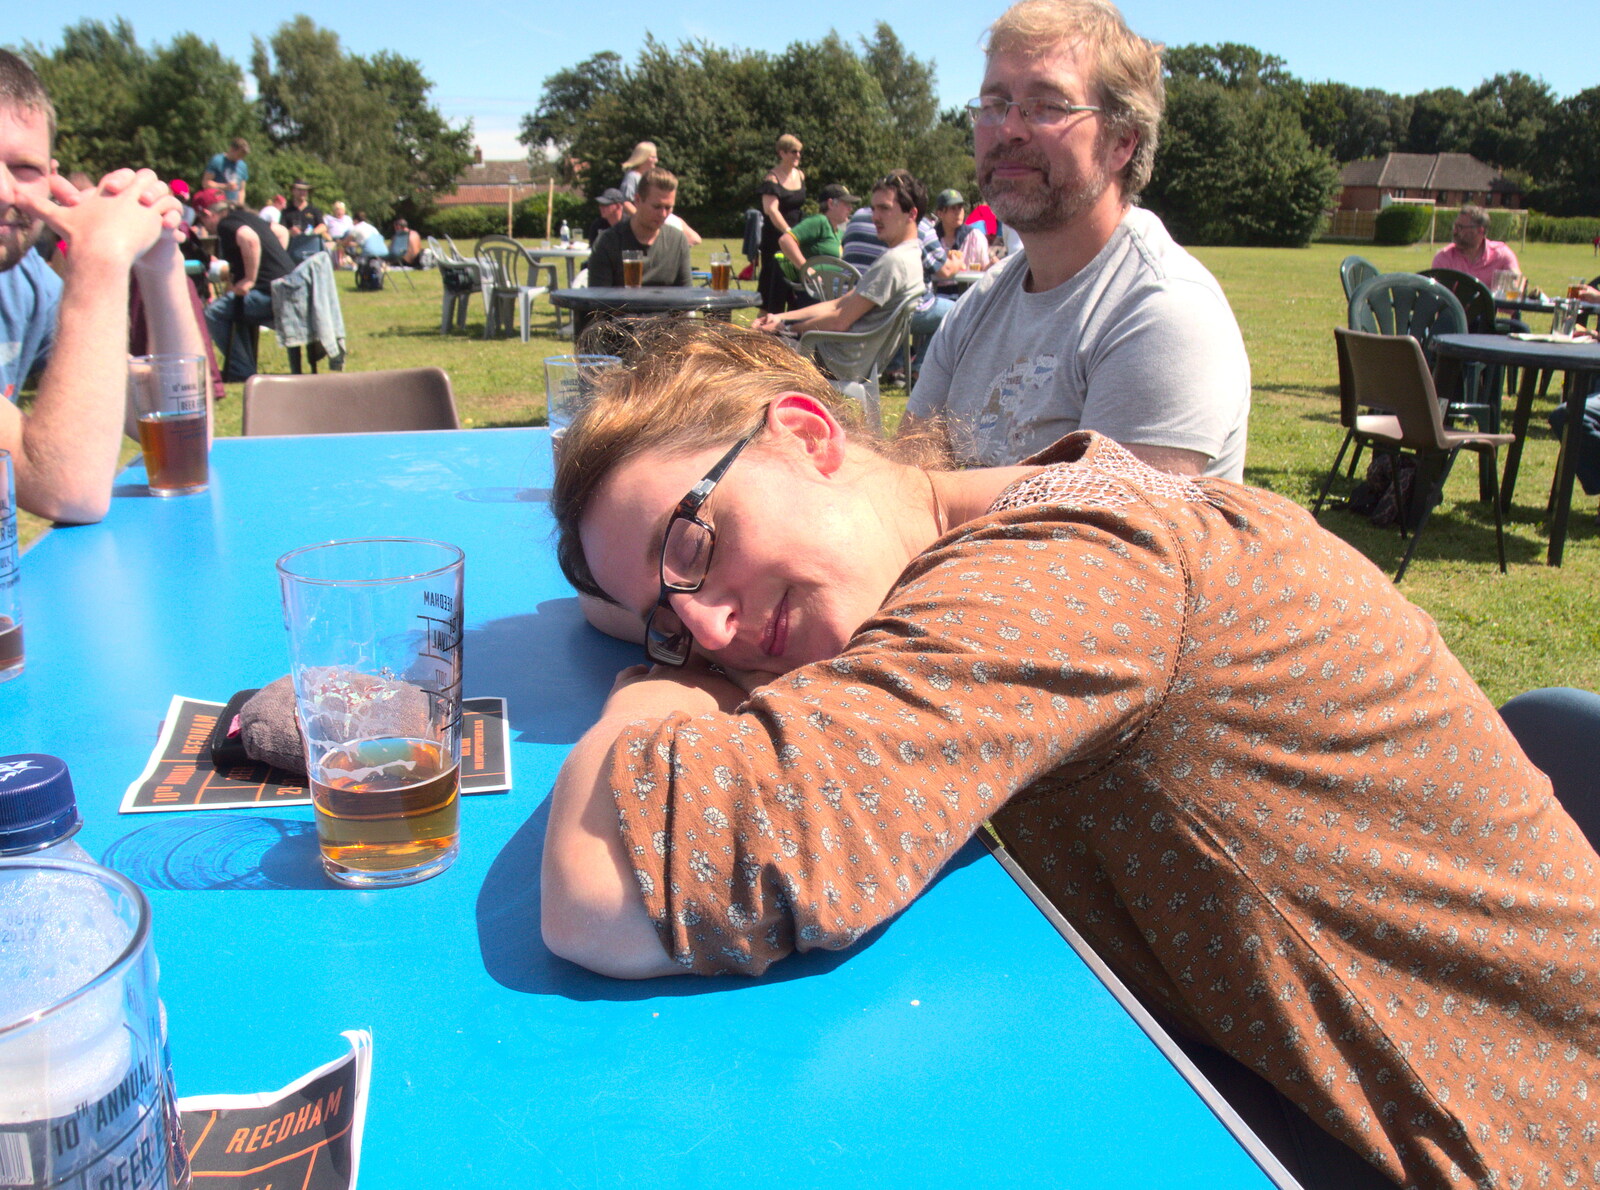 Suey has a doze in the sun from The Humpty Dumpty Beer Festival, Reedham, Norfolk - 22nd July 2017